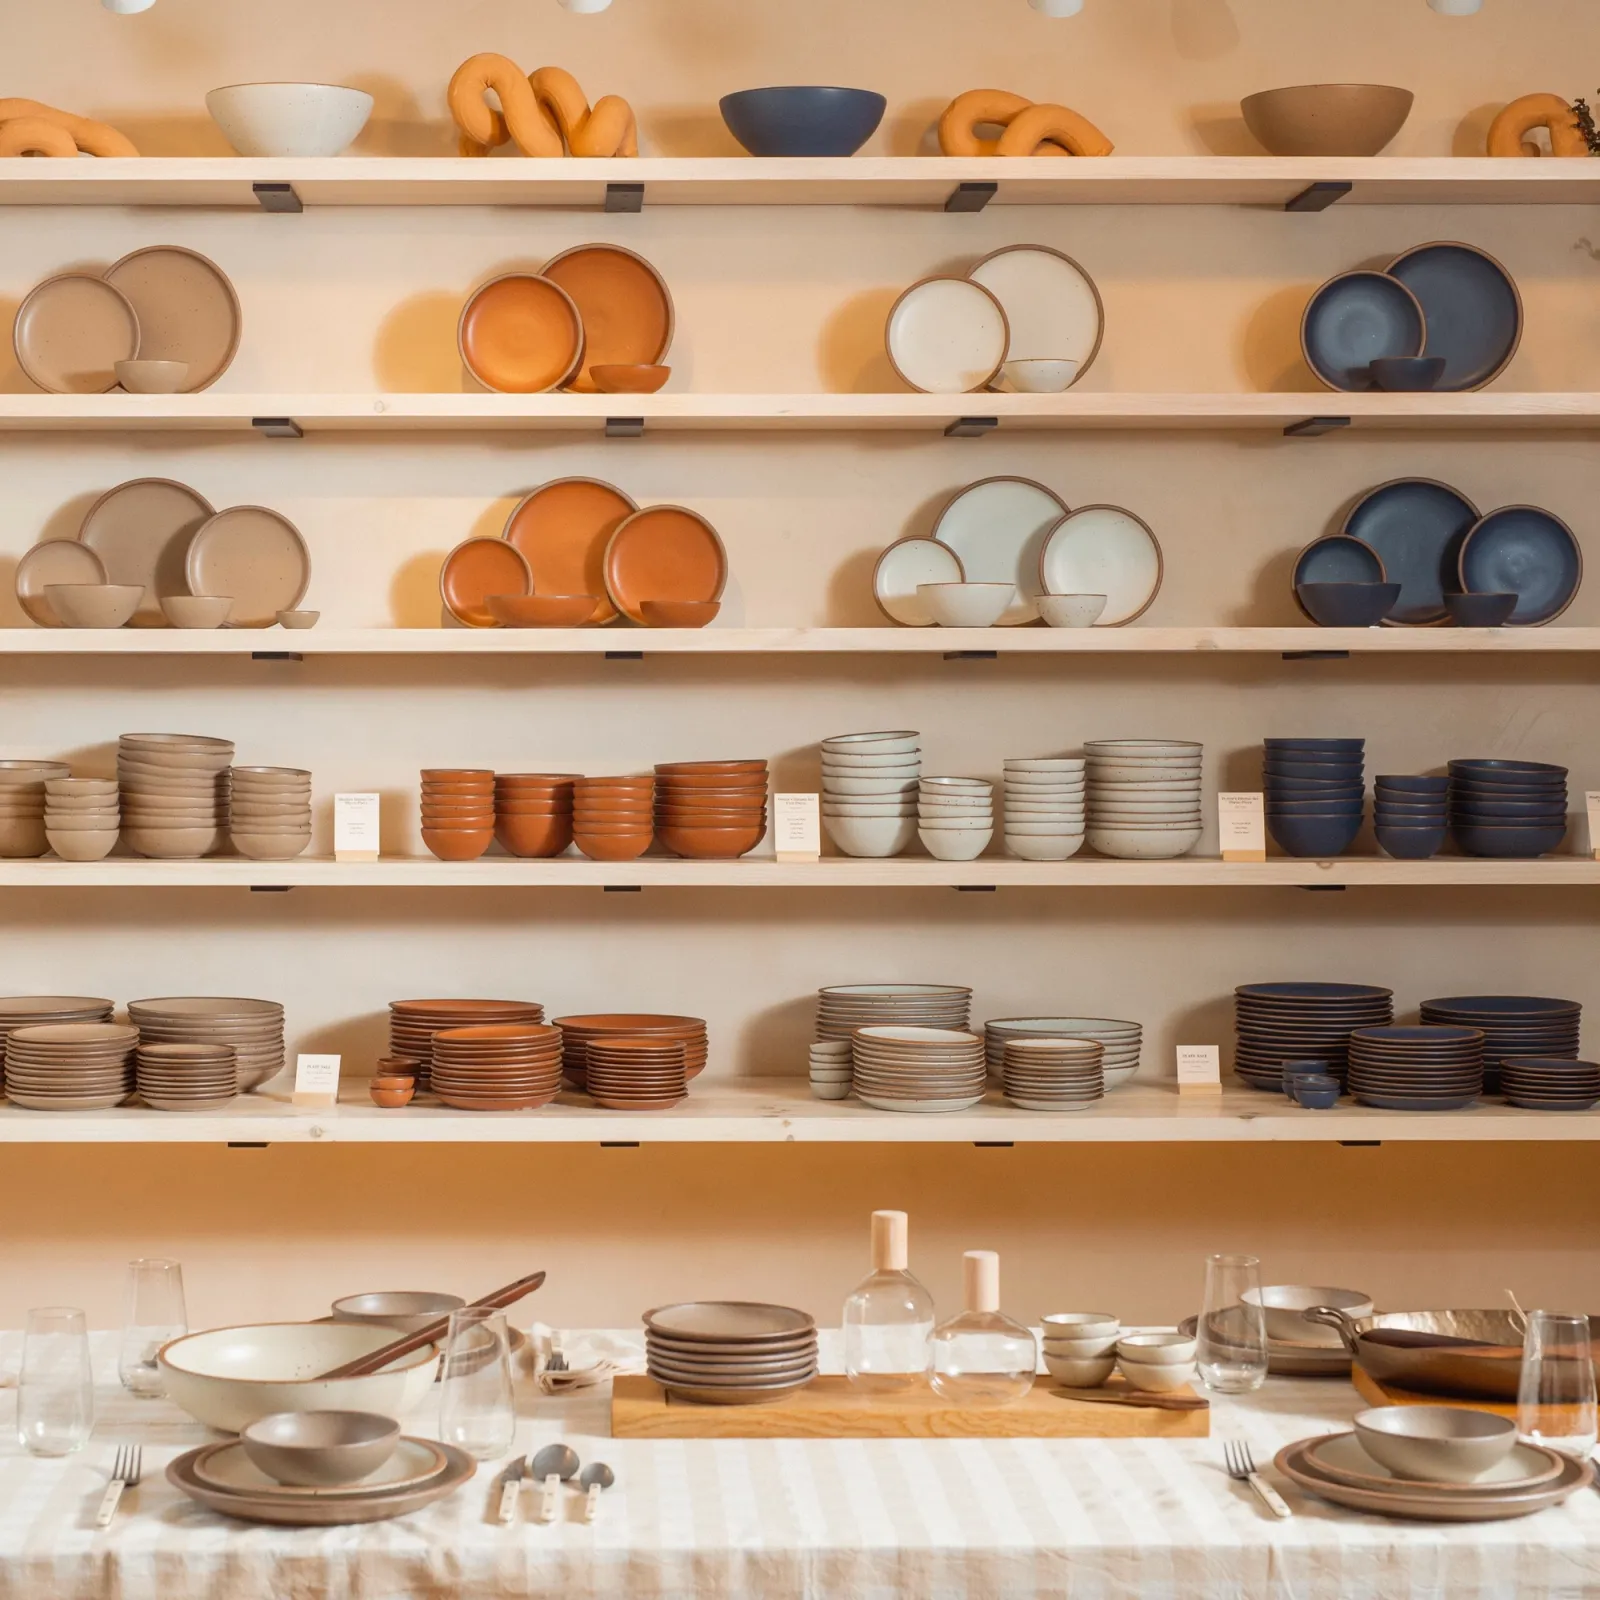 Ceramic dinnerware shop East Fork showcases bowls and plates on a tiered wall display.